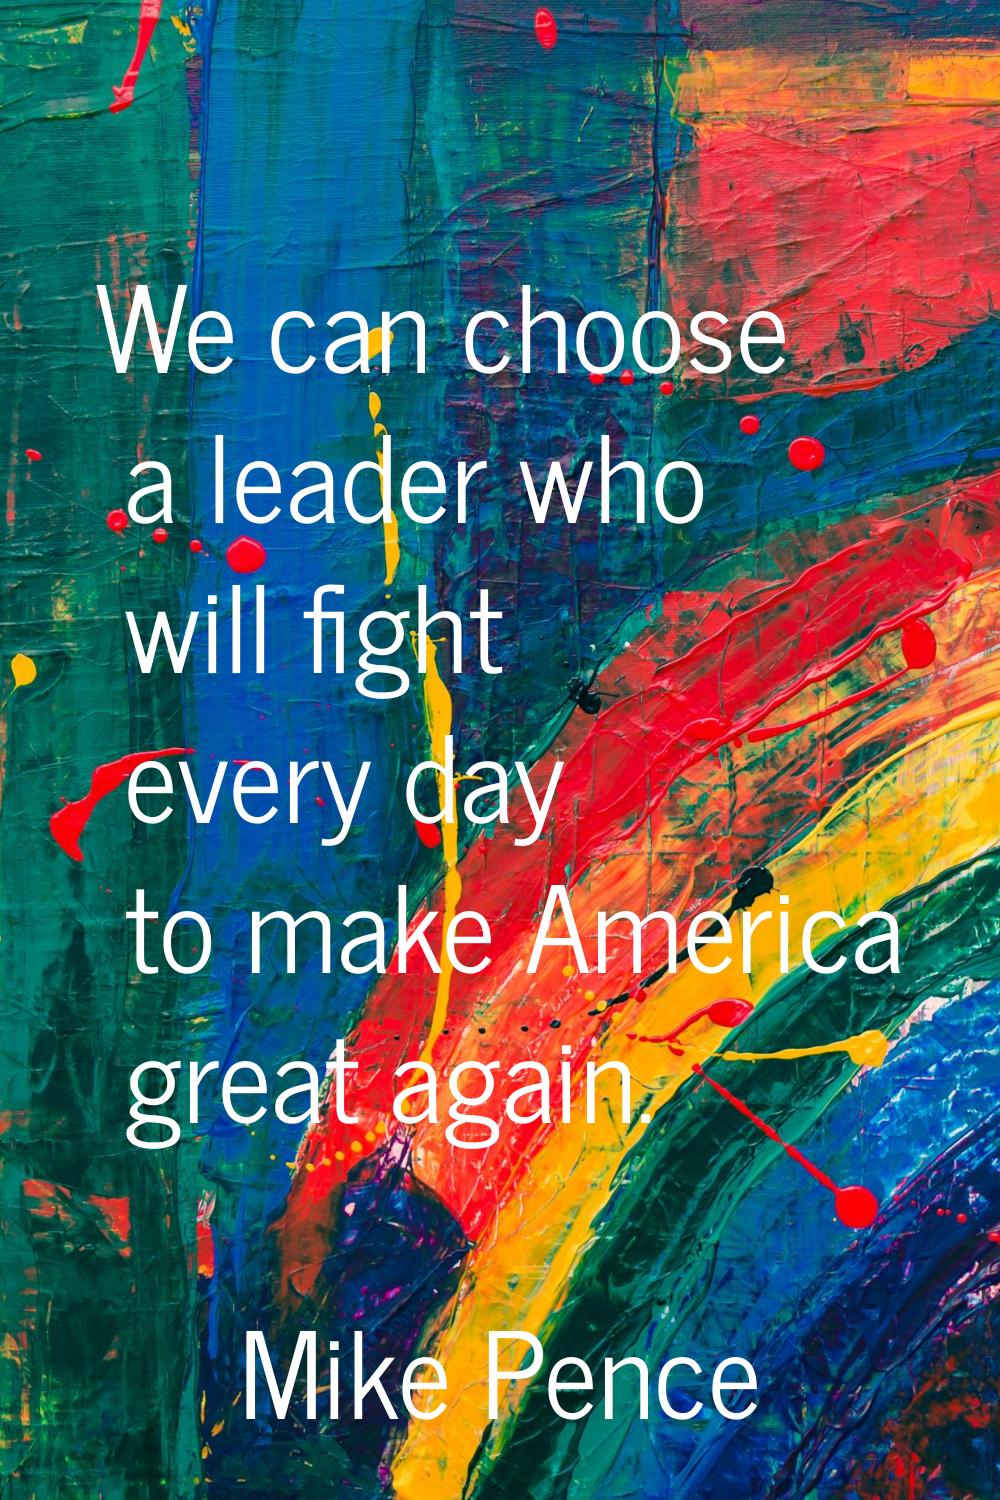 We can choose a leader who will fight every day to make America great again.